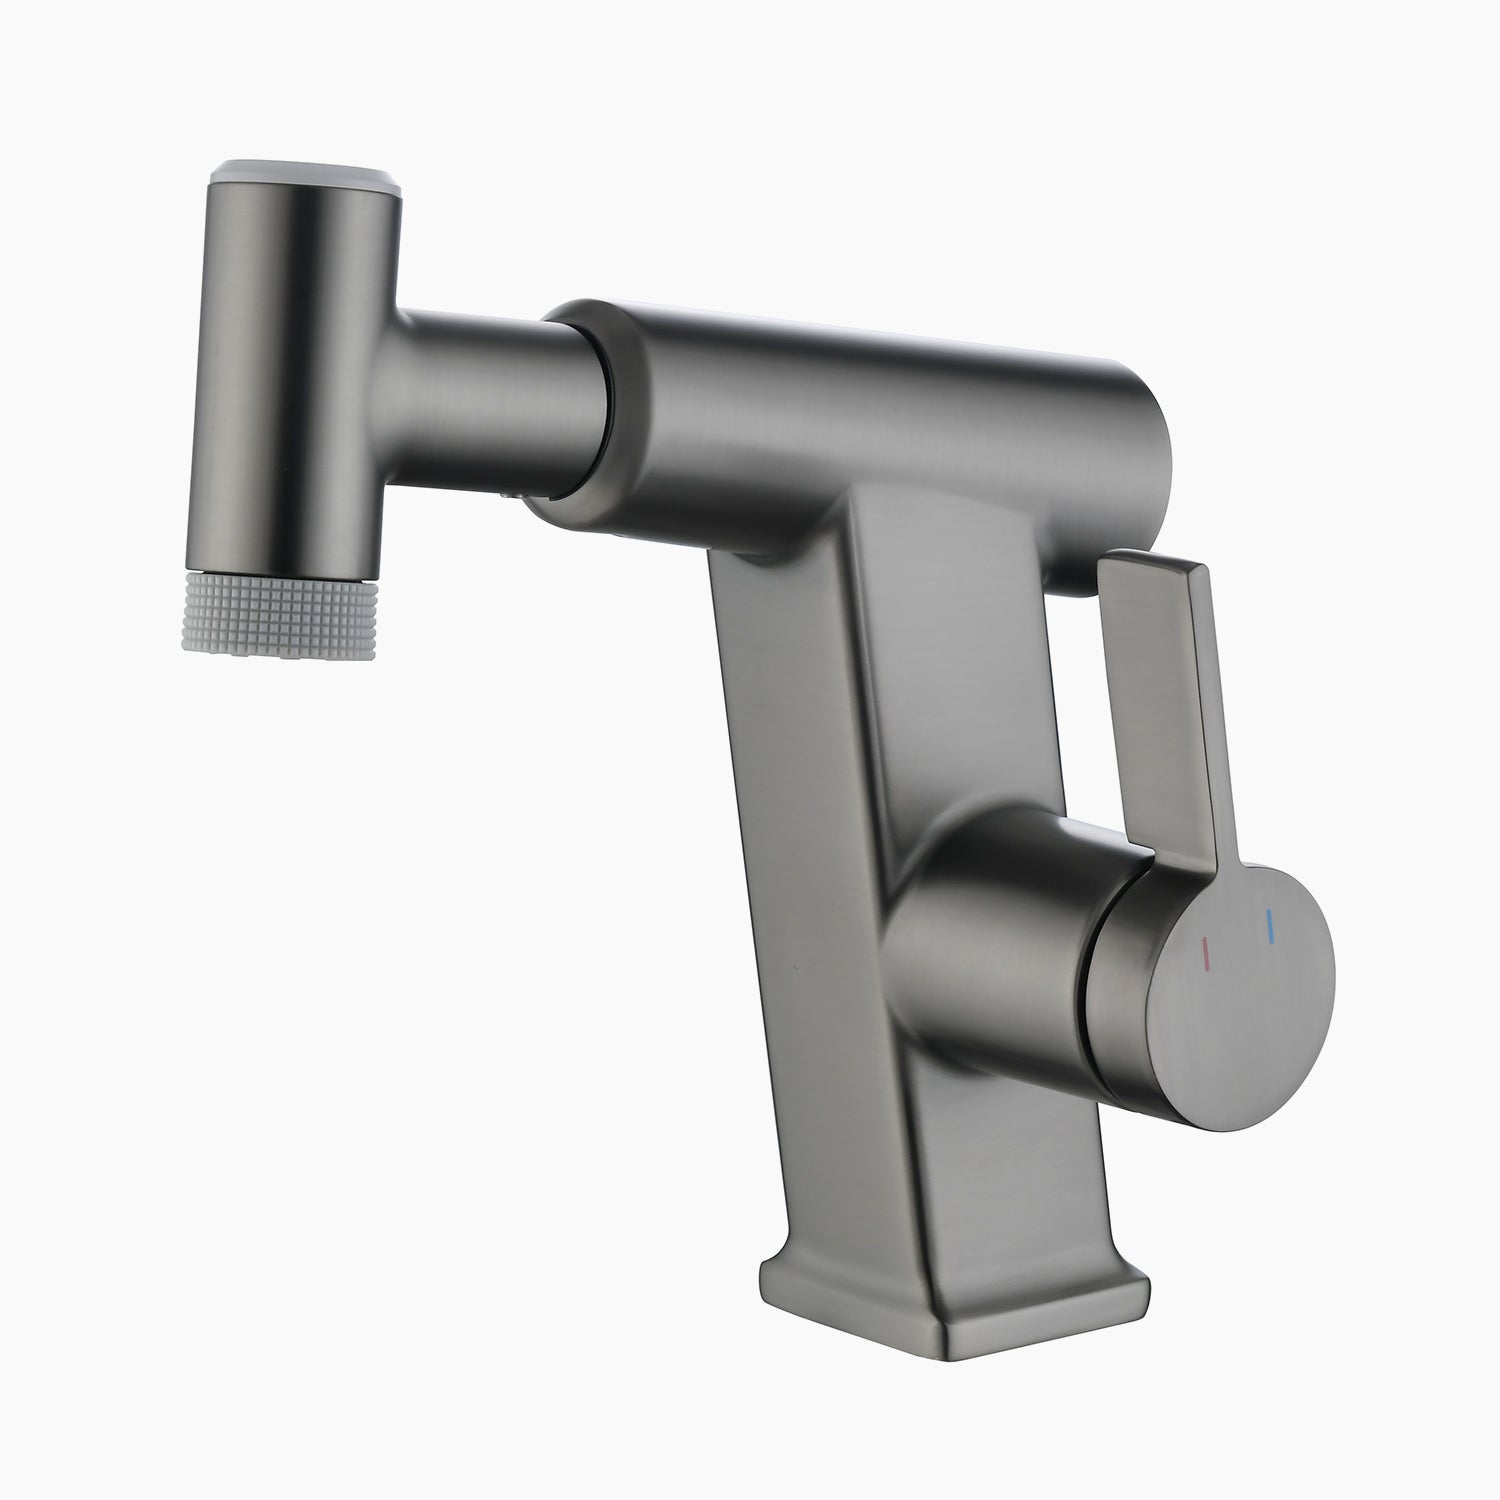 Lefton Pull - Out Faucet with Temperature Display & LED Light - BF2207 - Bathroom Faucets - Lefton Home